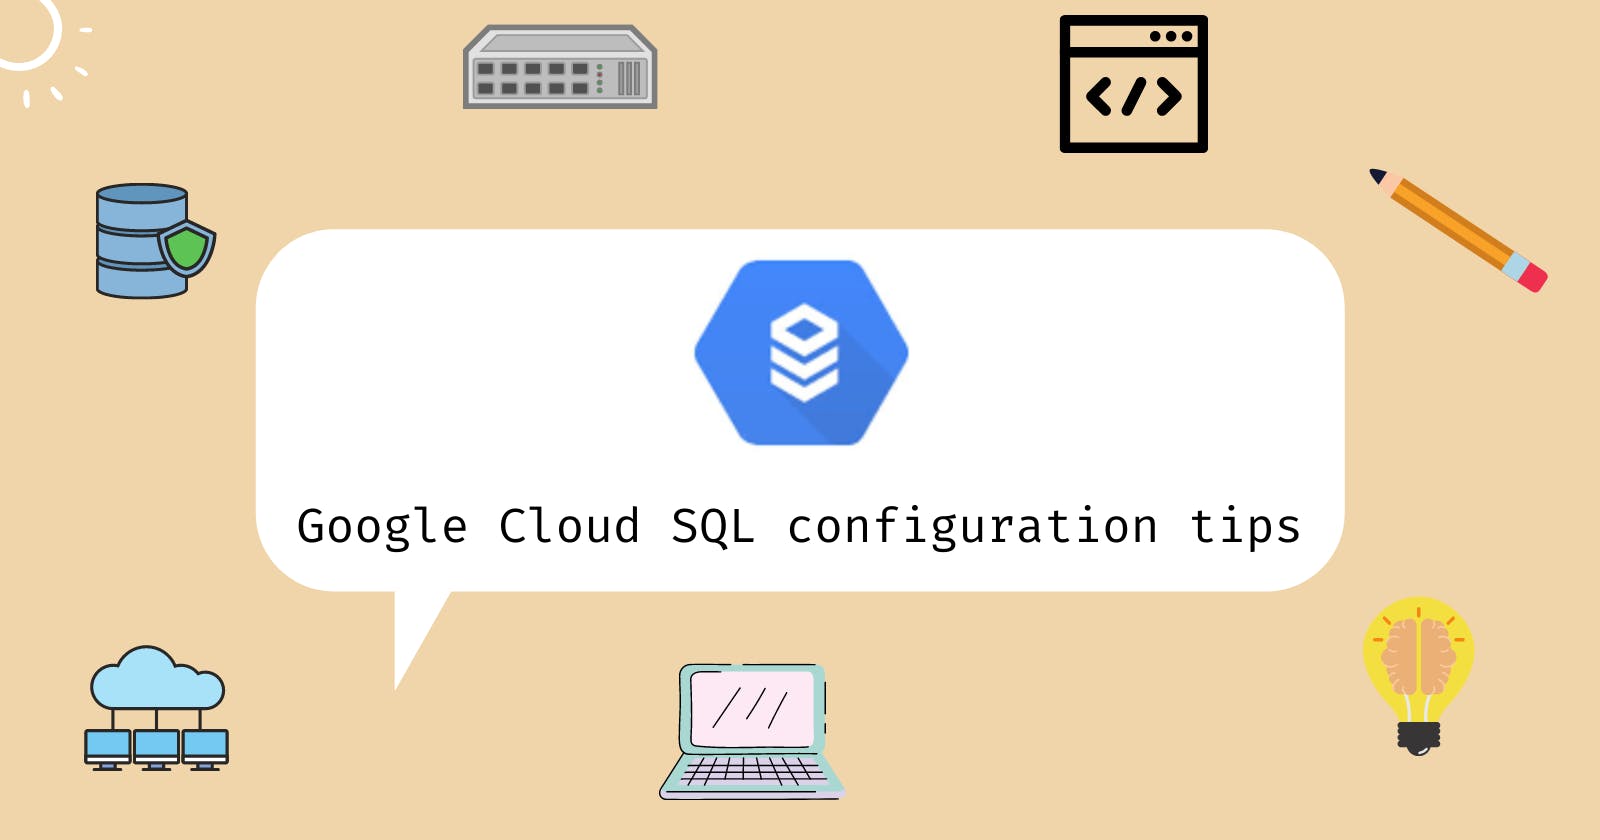 How to configure Google Cloud SQL? Some tips you may need.